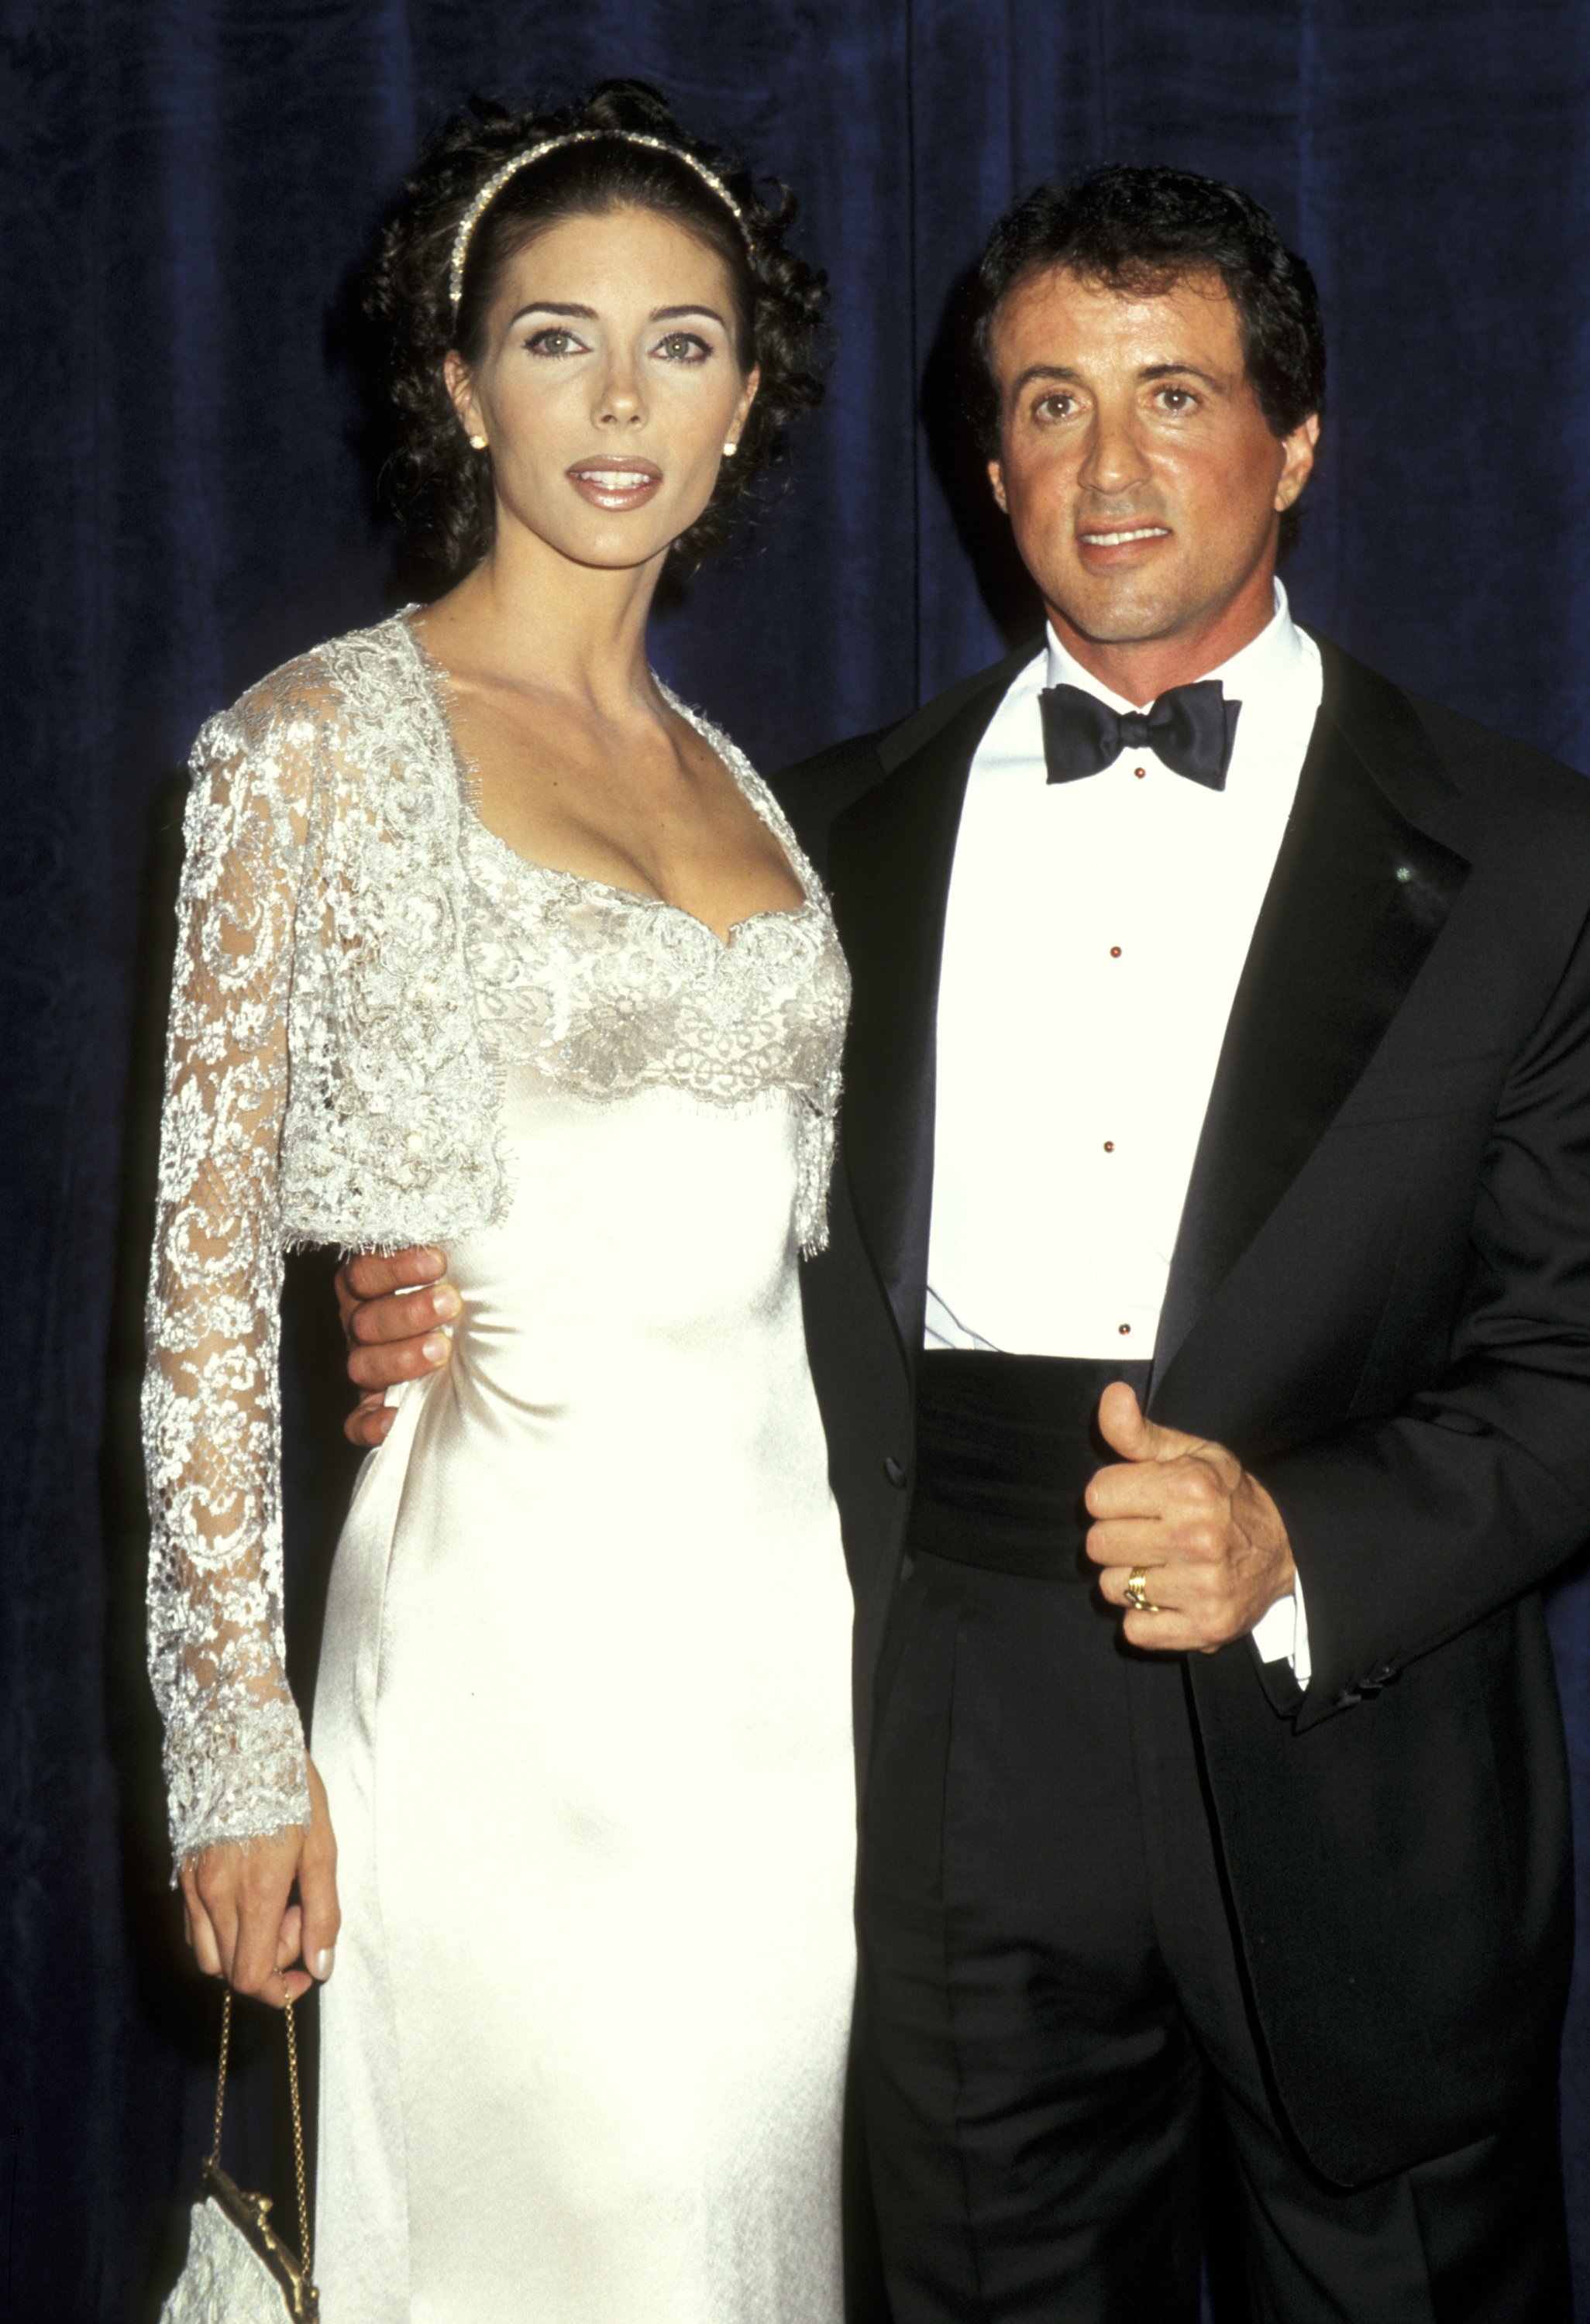 Jennifer Flavin And Sylvester Stallone during Friars Club Honors John Travolta and Kelly Preston at Waldorf Astoria in New York City, New York. | Source: Getty Images